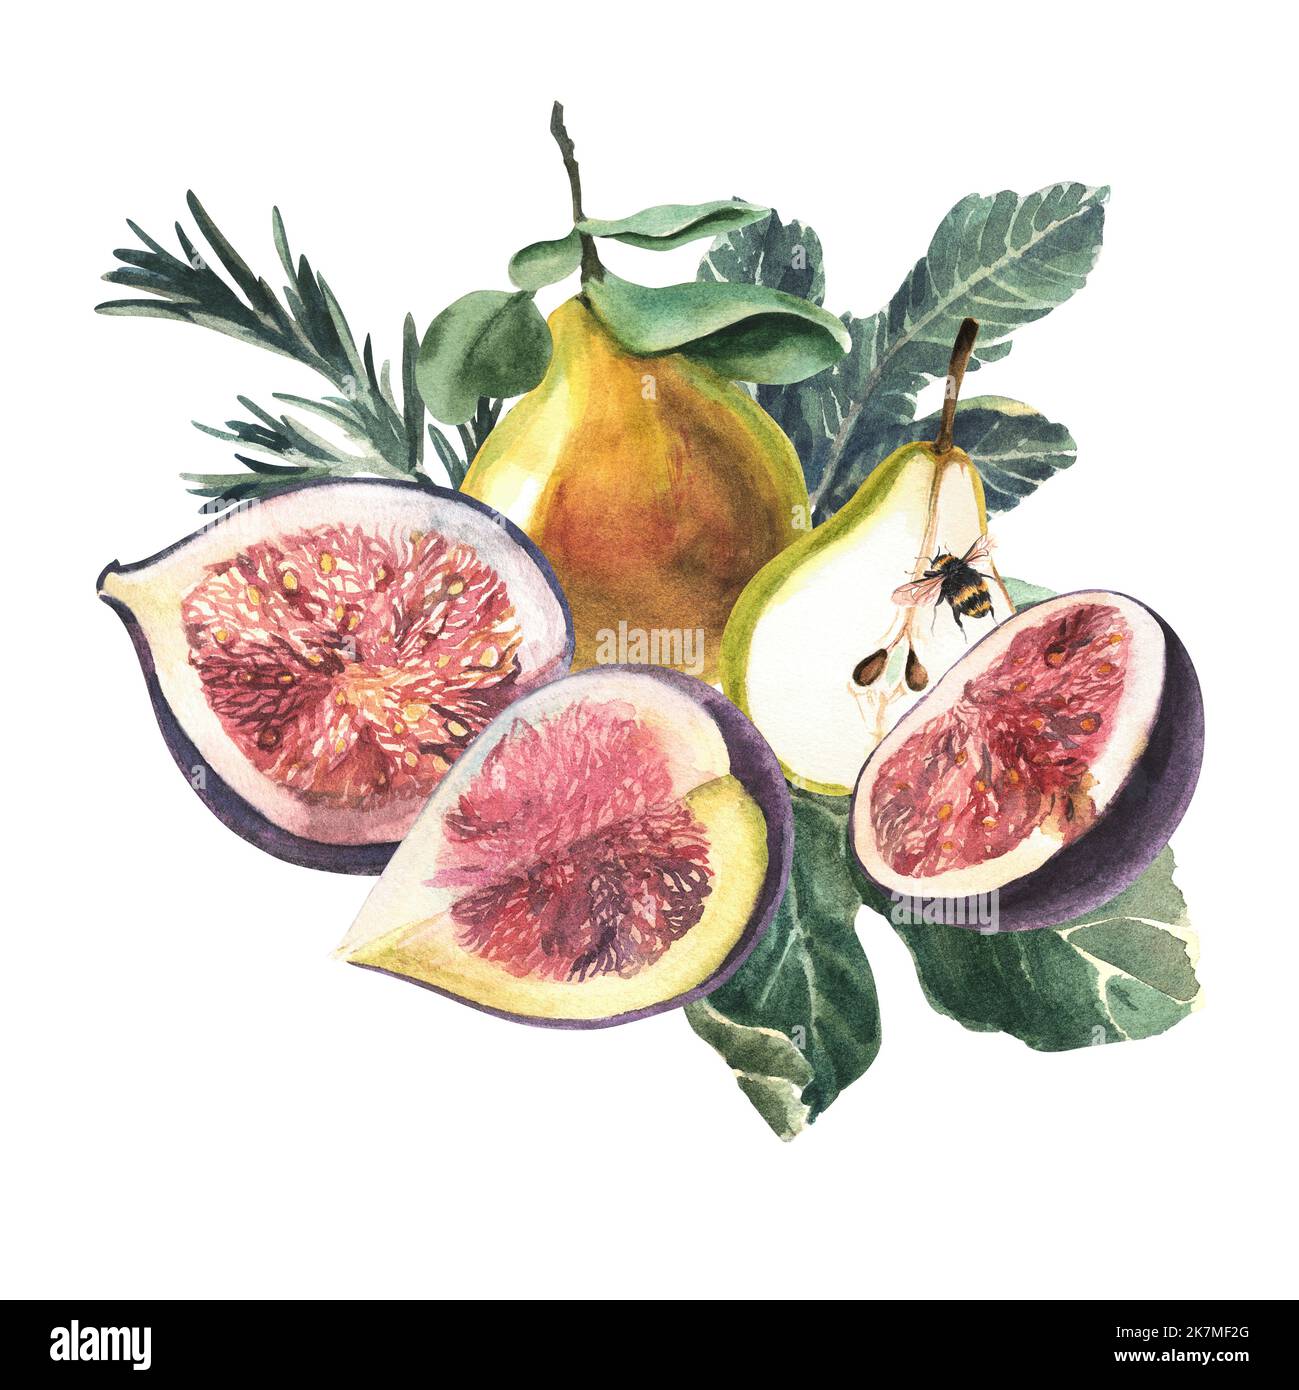 composition of figs, pears, bees and herbs on a white background. Watercolor hand painted illustration. Stock Photo